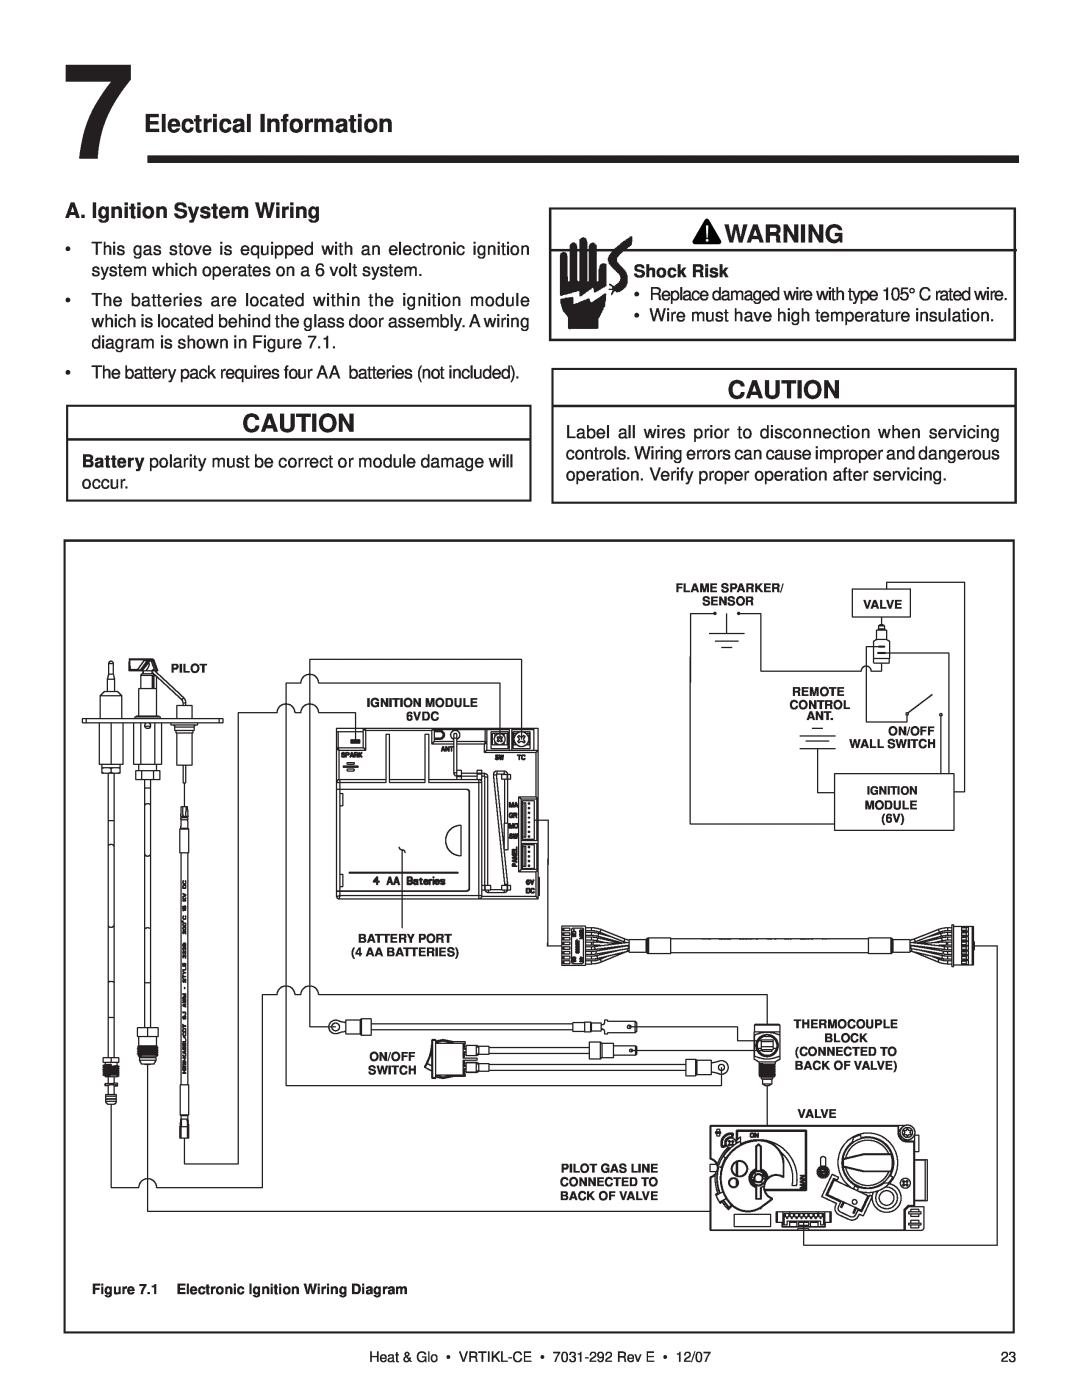 Hearth and Home Technologies VRT-BZ-B-CE, VRTIKL-CE manual 7Electrical Information, A. Ignition System Wiring, Shock Risk 